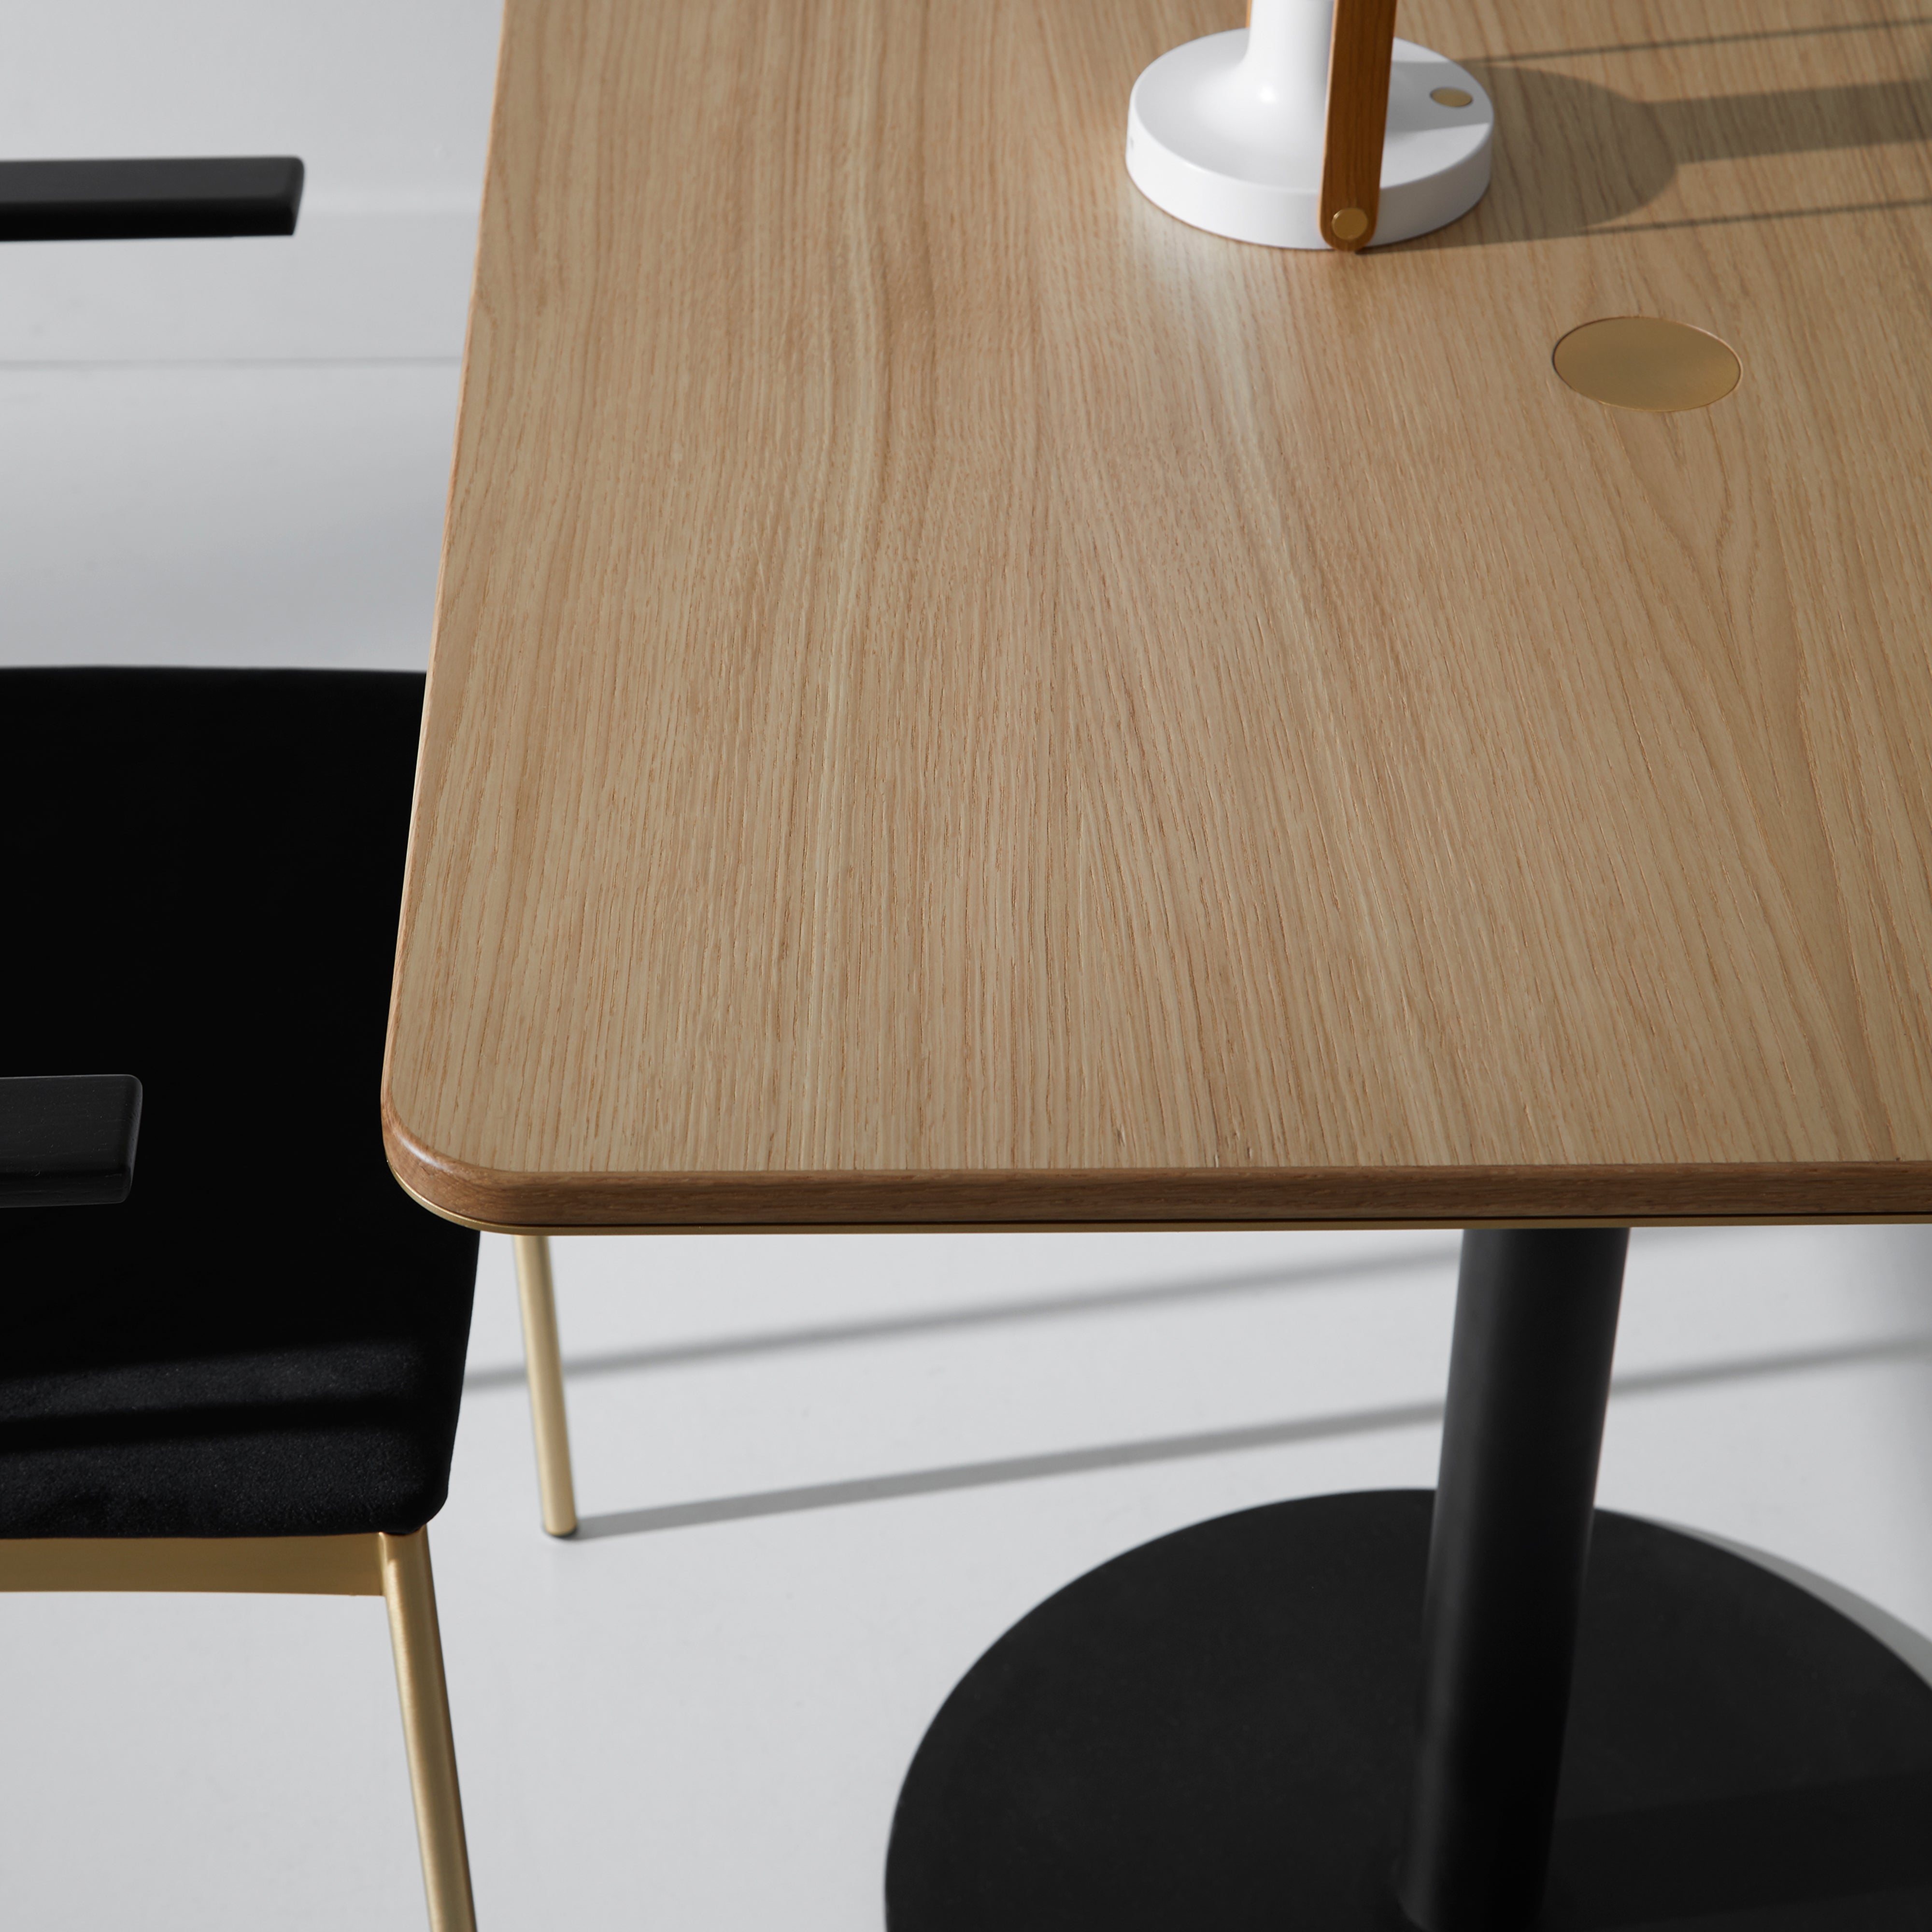 Nucleo Dining Table: Square